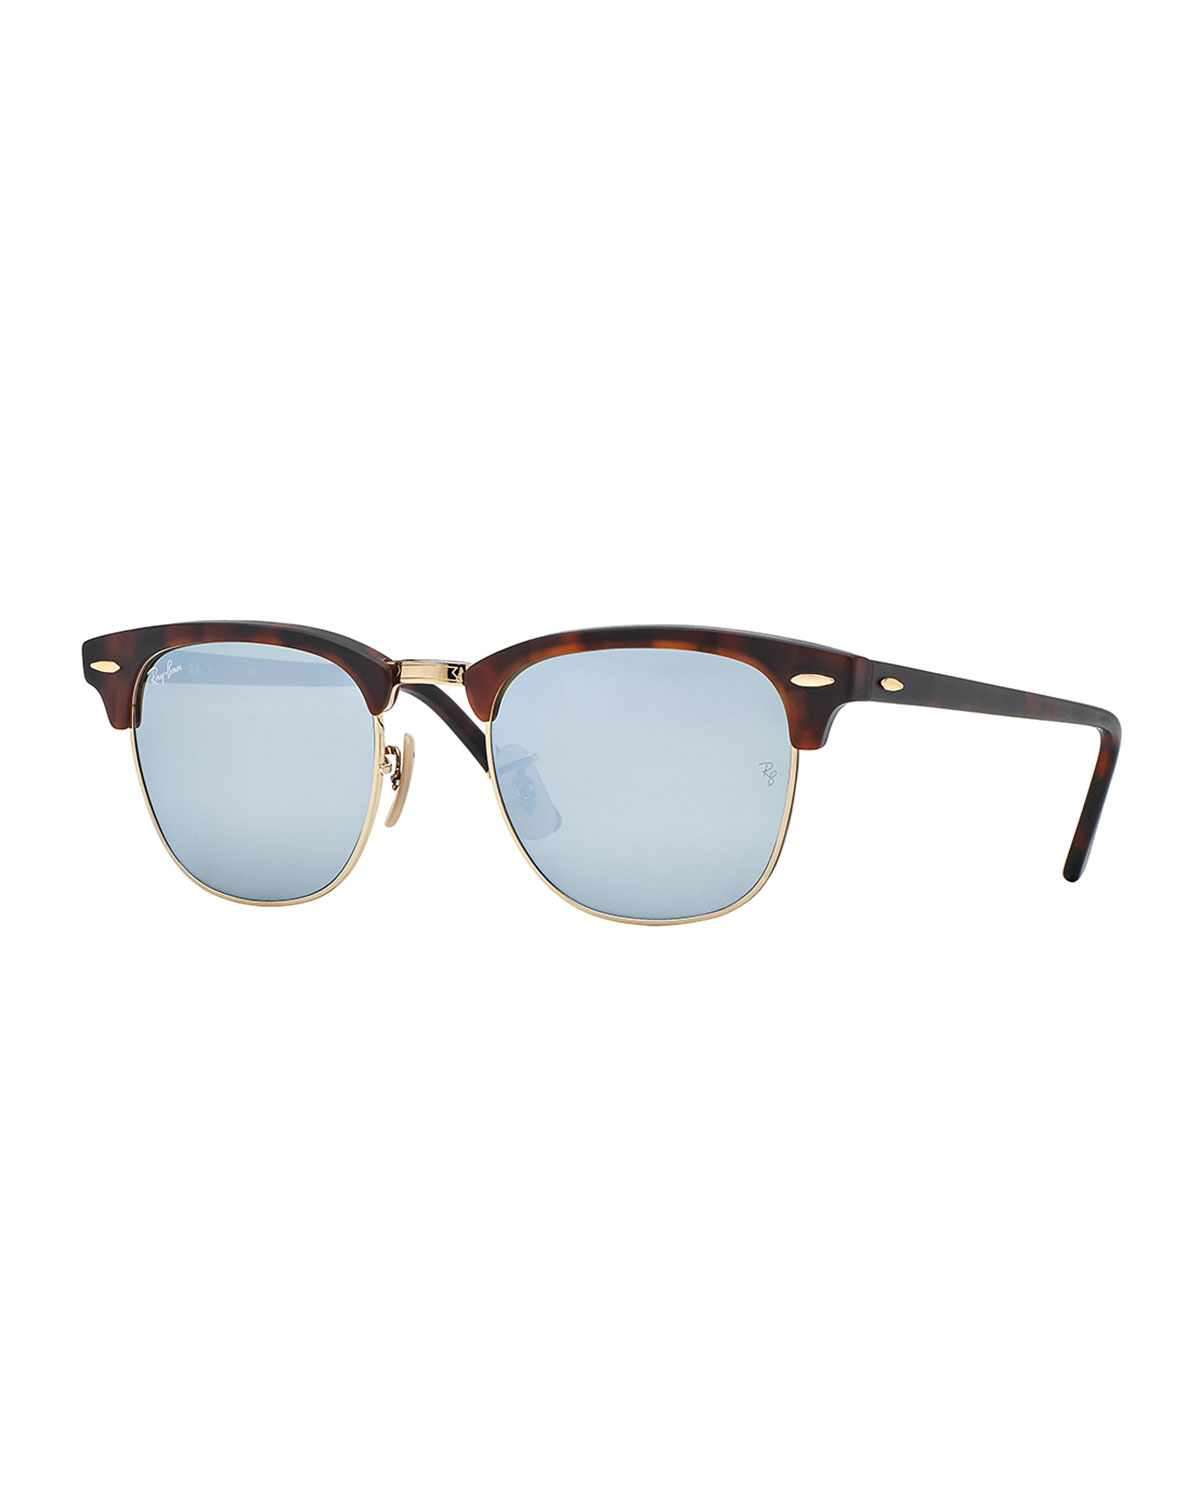 Ray Ban Clubmaster Sunglasses With Silver Mirror Lens In Blue Lyst 7908